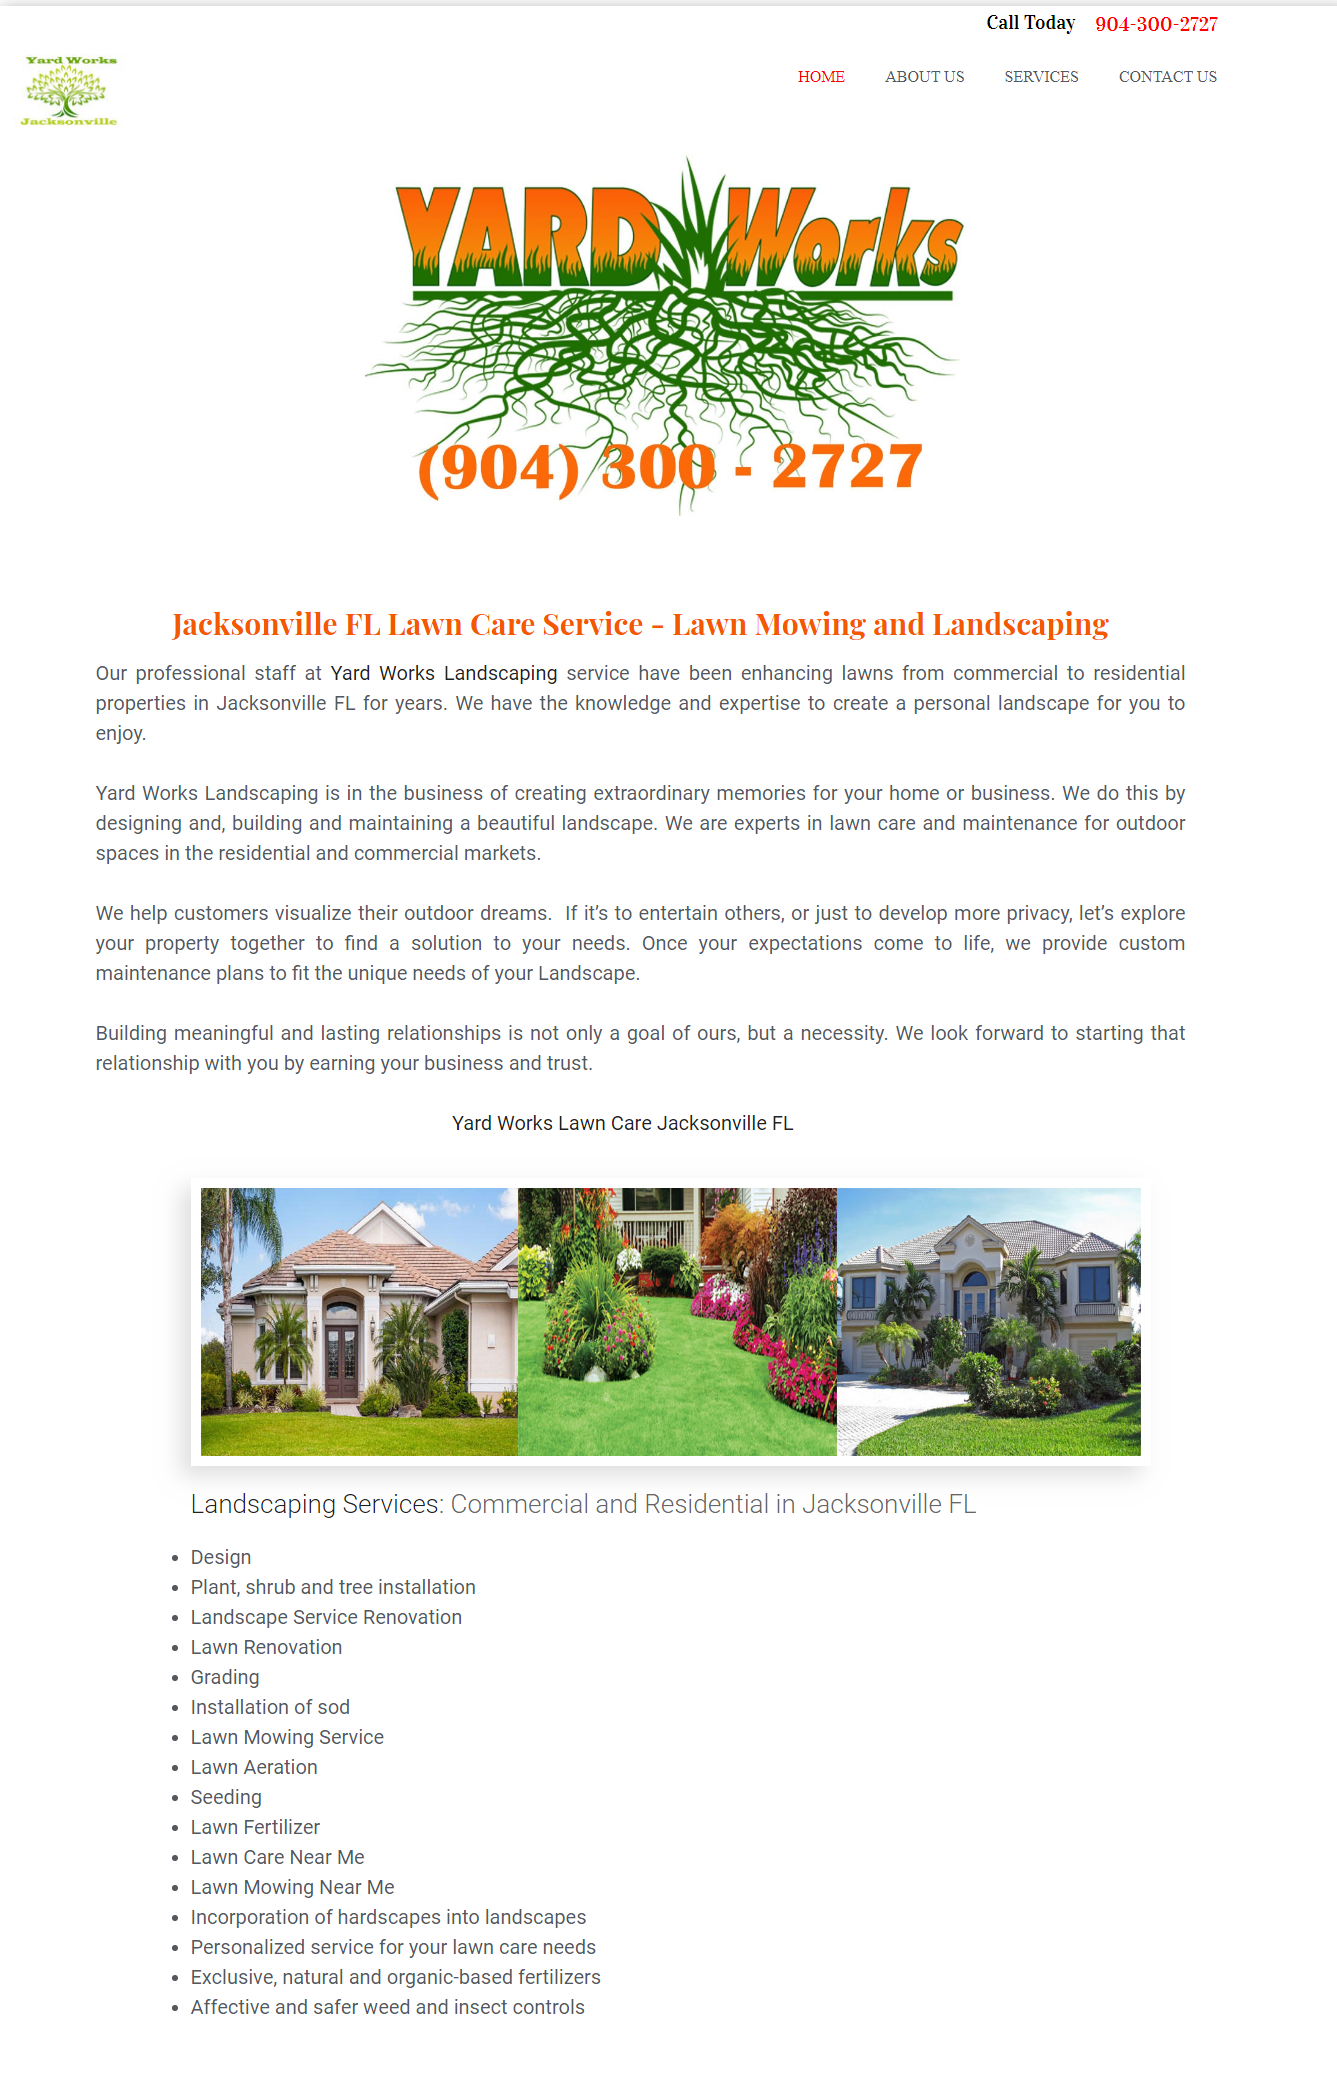 1 San Antonio, TX Lawn Care Service - Lawn Mowing from $19 - Best 2021